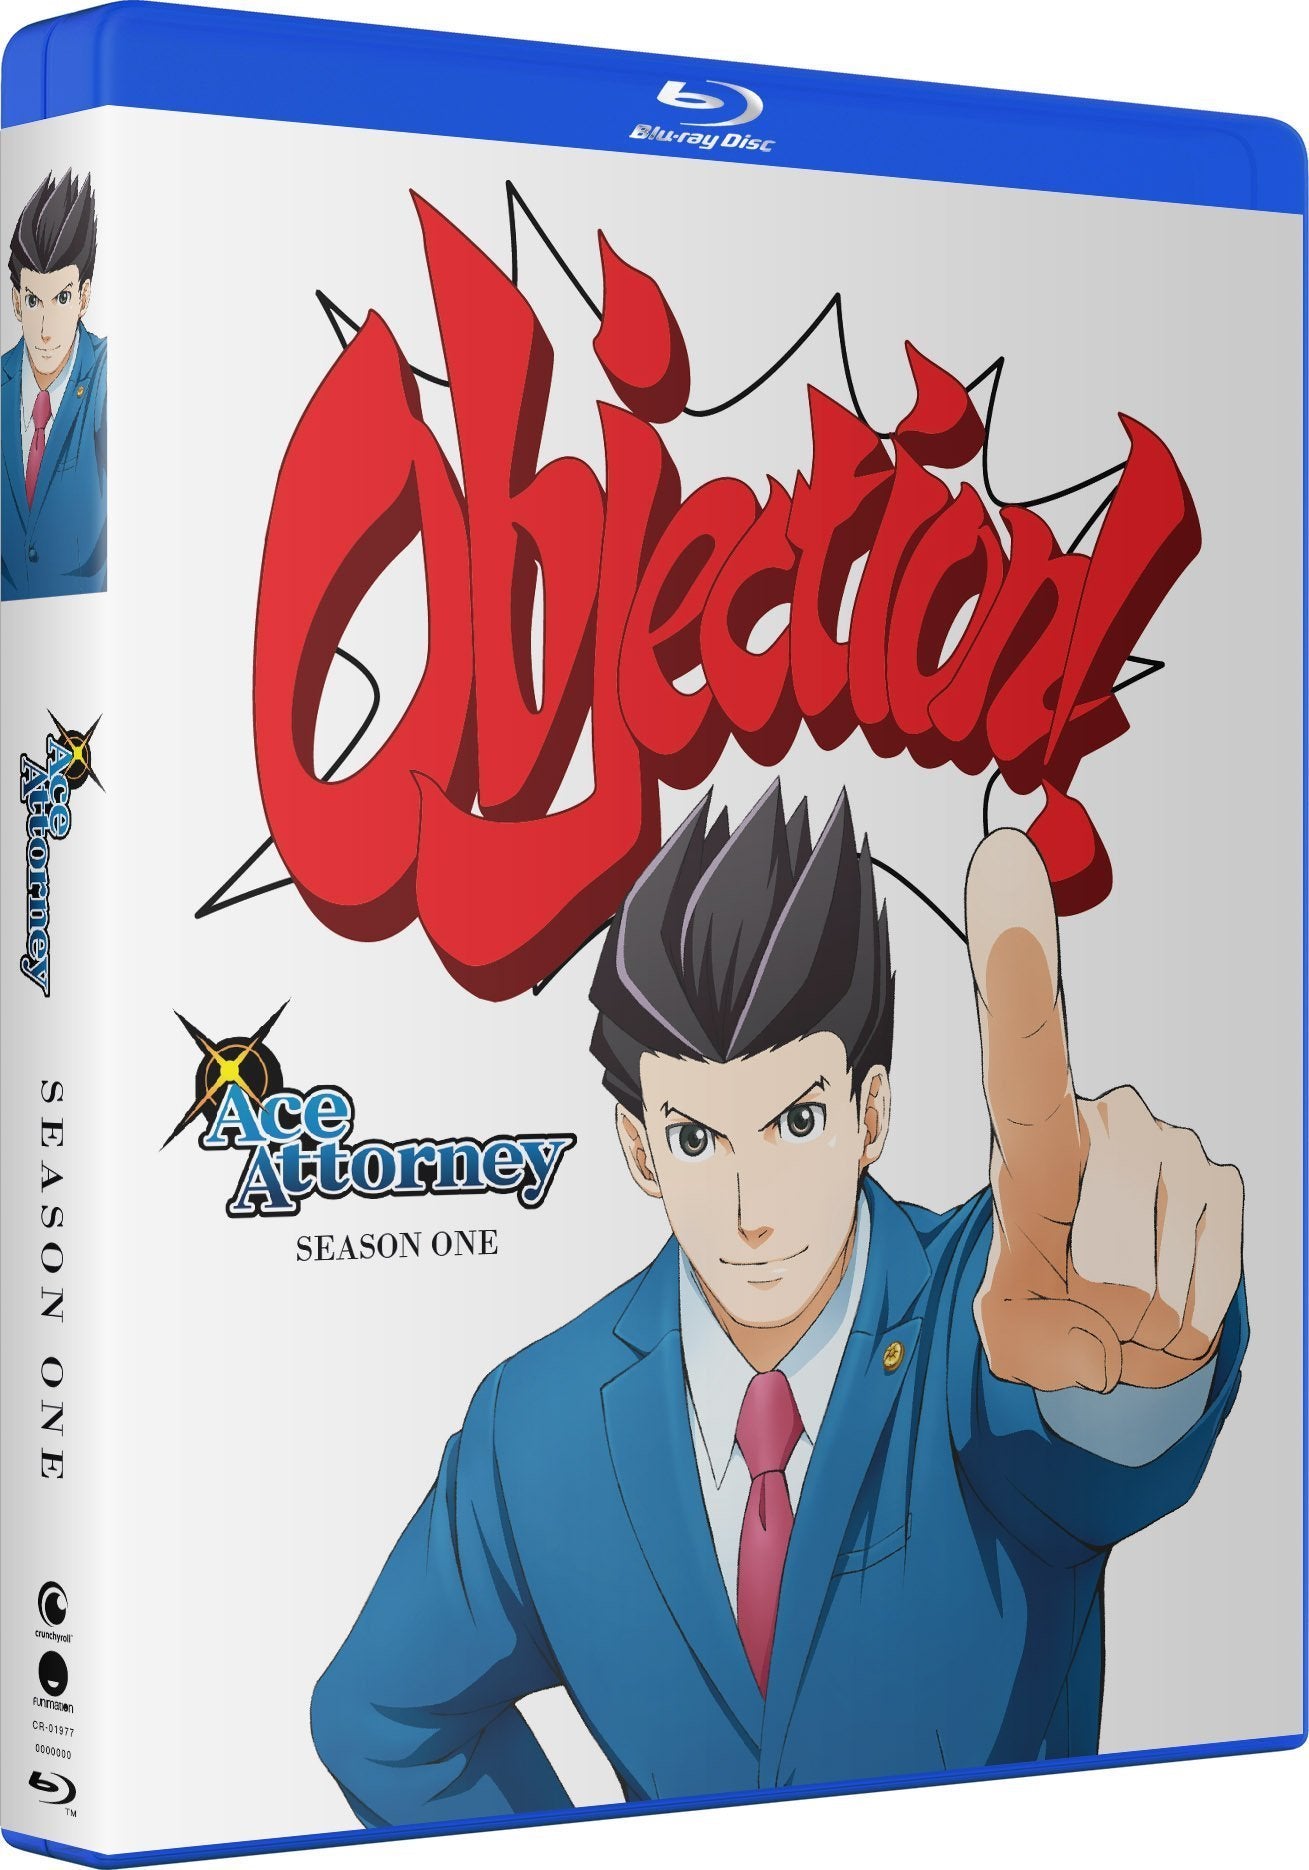 Ace Attorney - Season 1 - Blu-ray image count 1